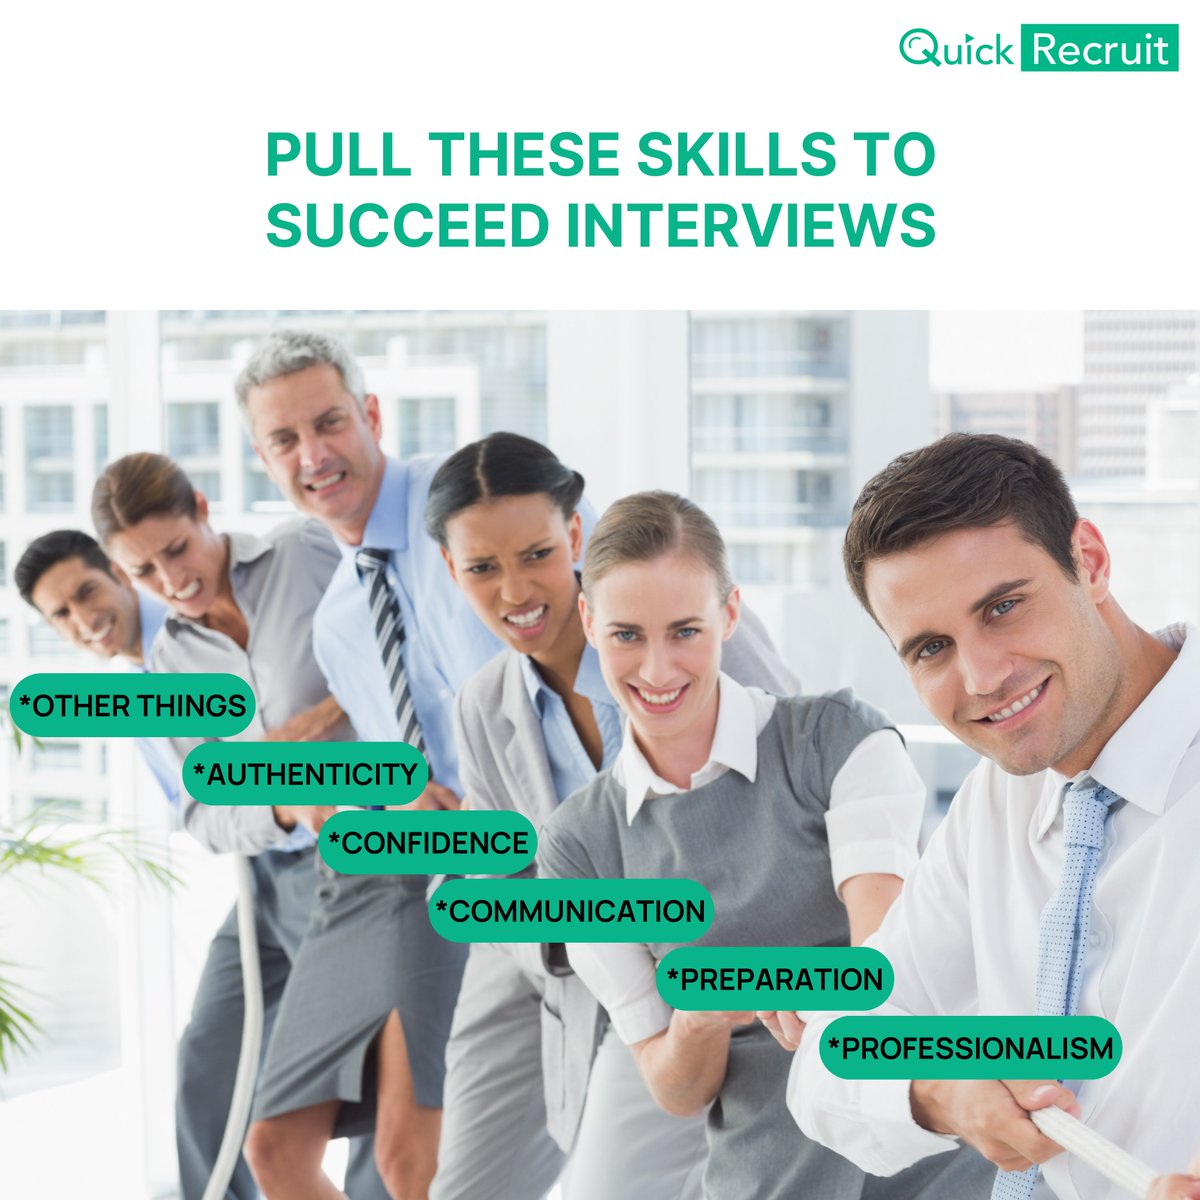 Ready to rocket your way through interviews? 
These 6 skills are your launchpad to success!

Try out our AI resume builder: shorturl.at/mxHO9

#interviewtips #softskills #careergrowth #skillstosucceed #interviewasaservice #virtualinterviews #quickrecruit